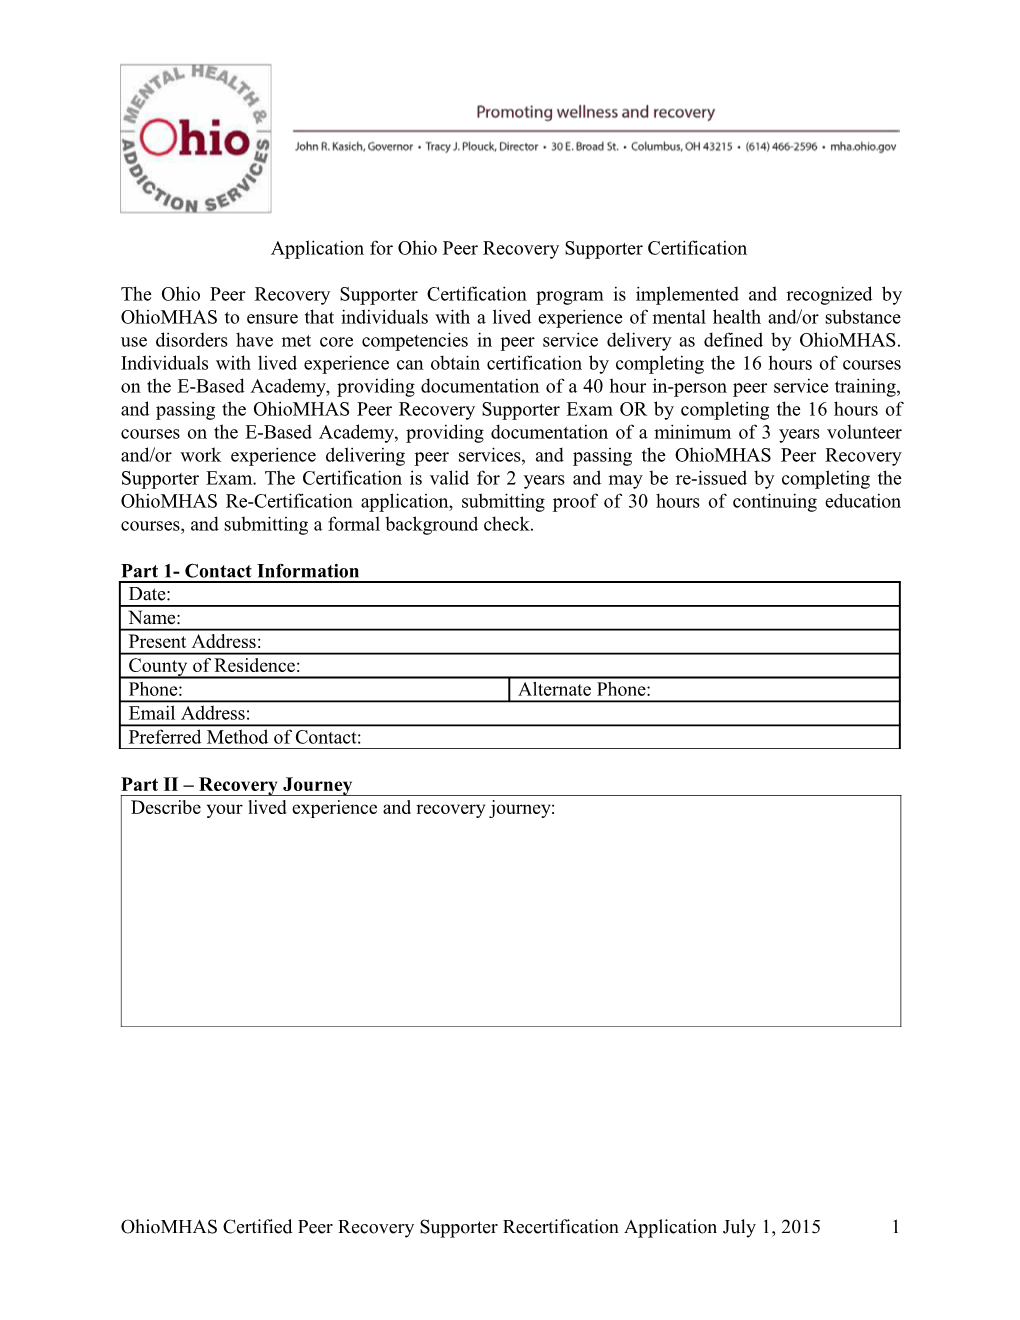 Application for Ohio Peer Recovery Supporter Certification